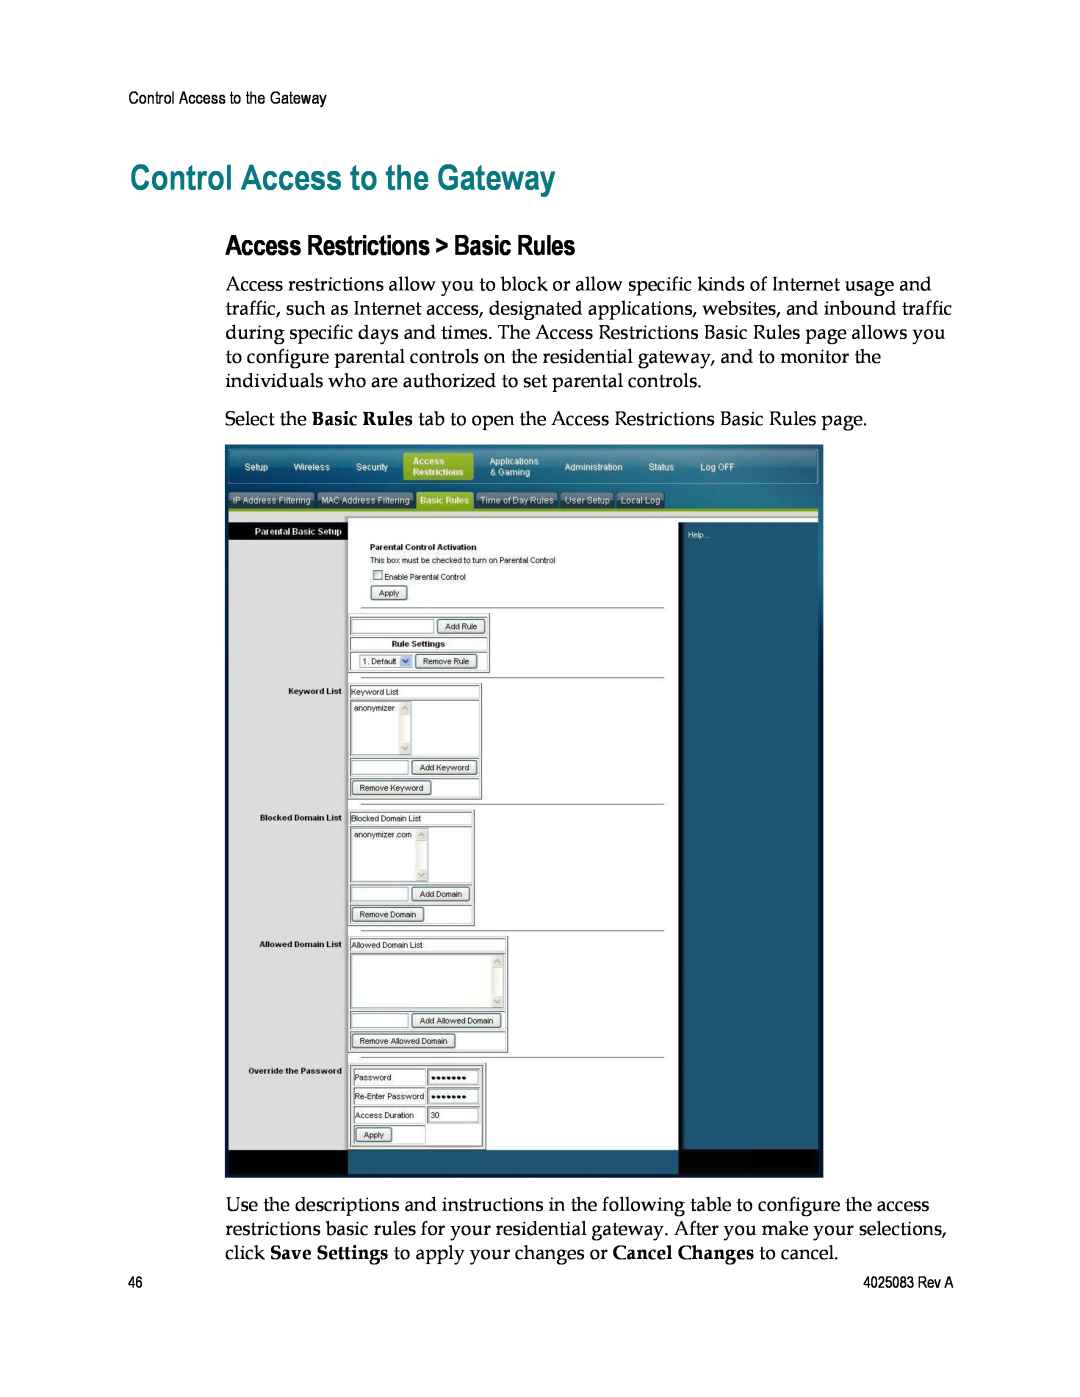 Cisco Systems DPC3827, EPC3827, 4039760 Control Access to the Gateway, Access Restrictions Basic Rules 